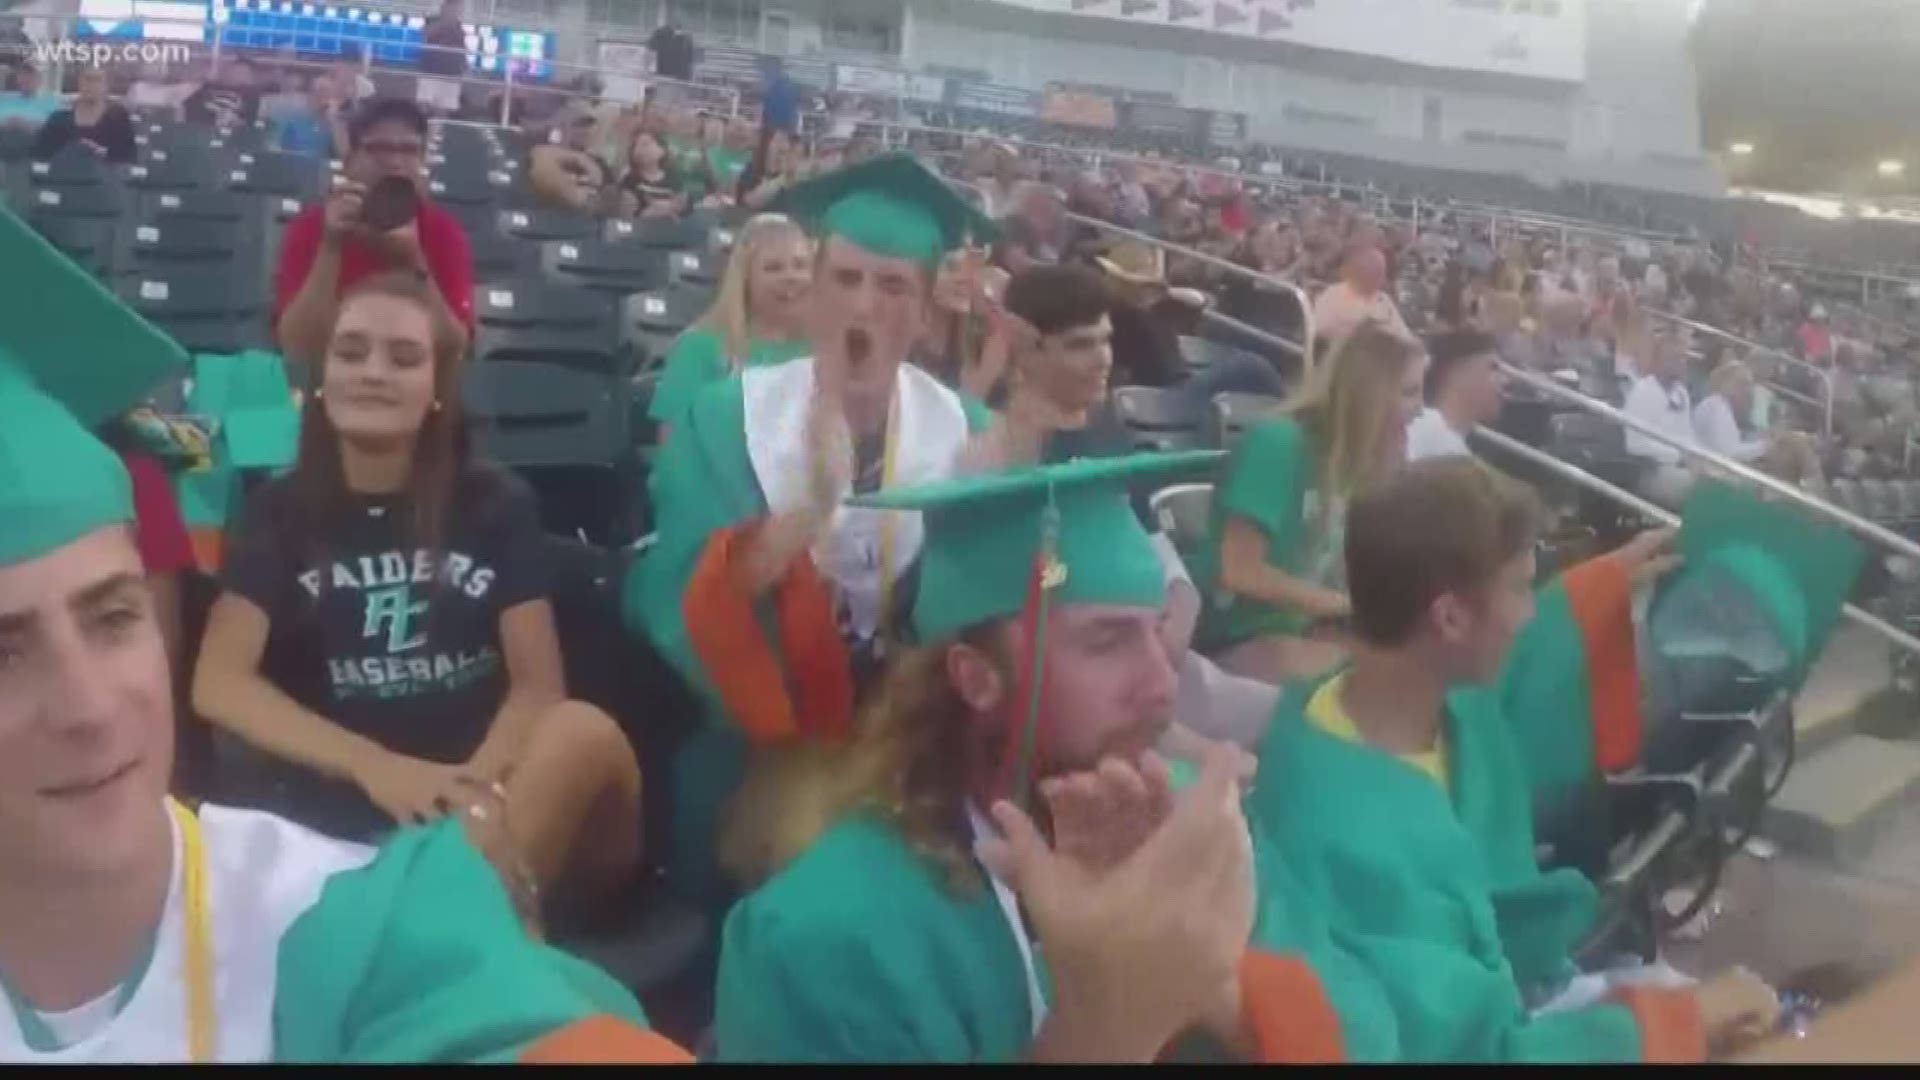 Six Plant City High School seniors missed their graduation ceremony to play in the Class 8A state championship game at Hammond Stadium in Fort Myers, Florida. https://on.wtsp.com/2HLBiR8